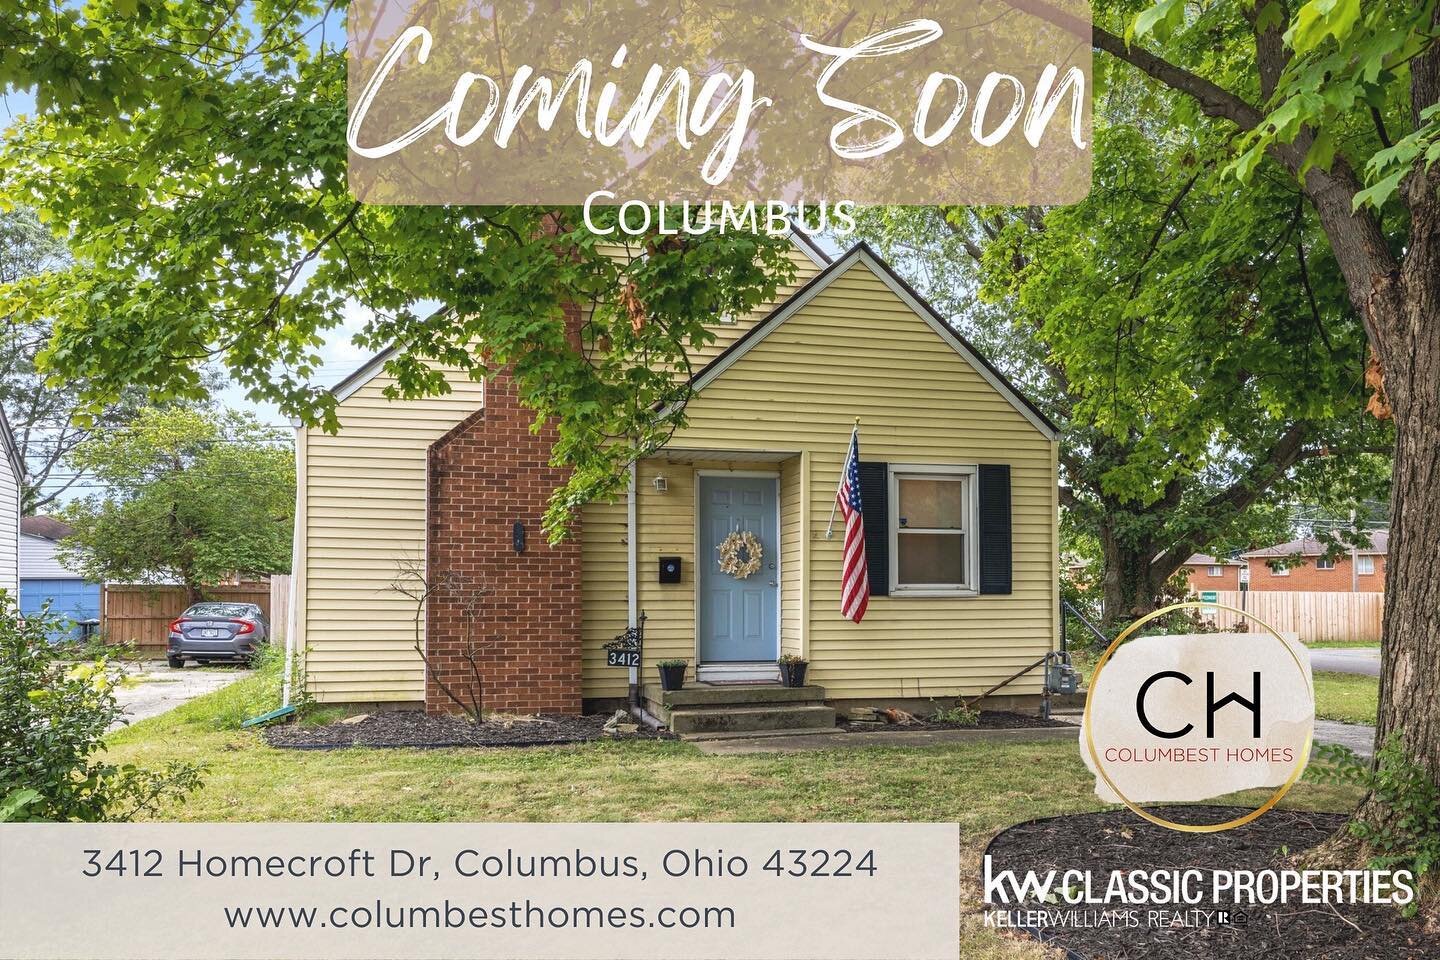 10 pictures don&rsquo;t do this #ComingSoon home justice! Head to link in bio for all the details 👀 and setup your showing now 🚪
Showings start Sat 8/20 &amp; open house is from 12pm-2pm 🏡
&hellip;
3412 Homecroft Dr, Columbus, Ohio 43224
Listed by